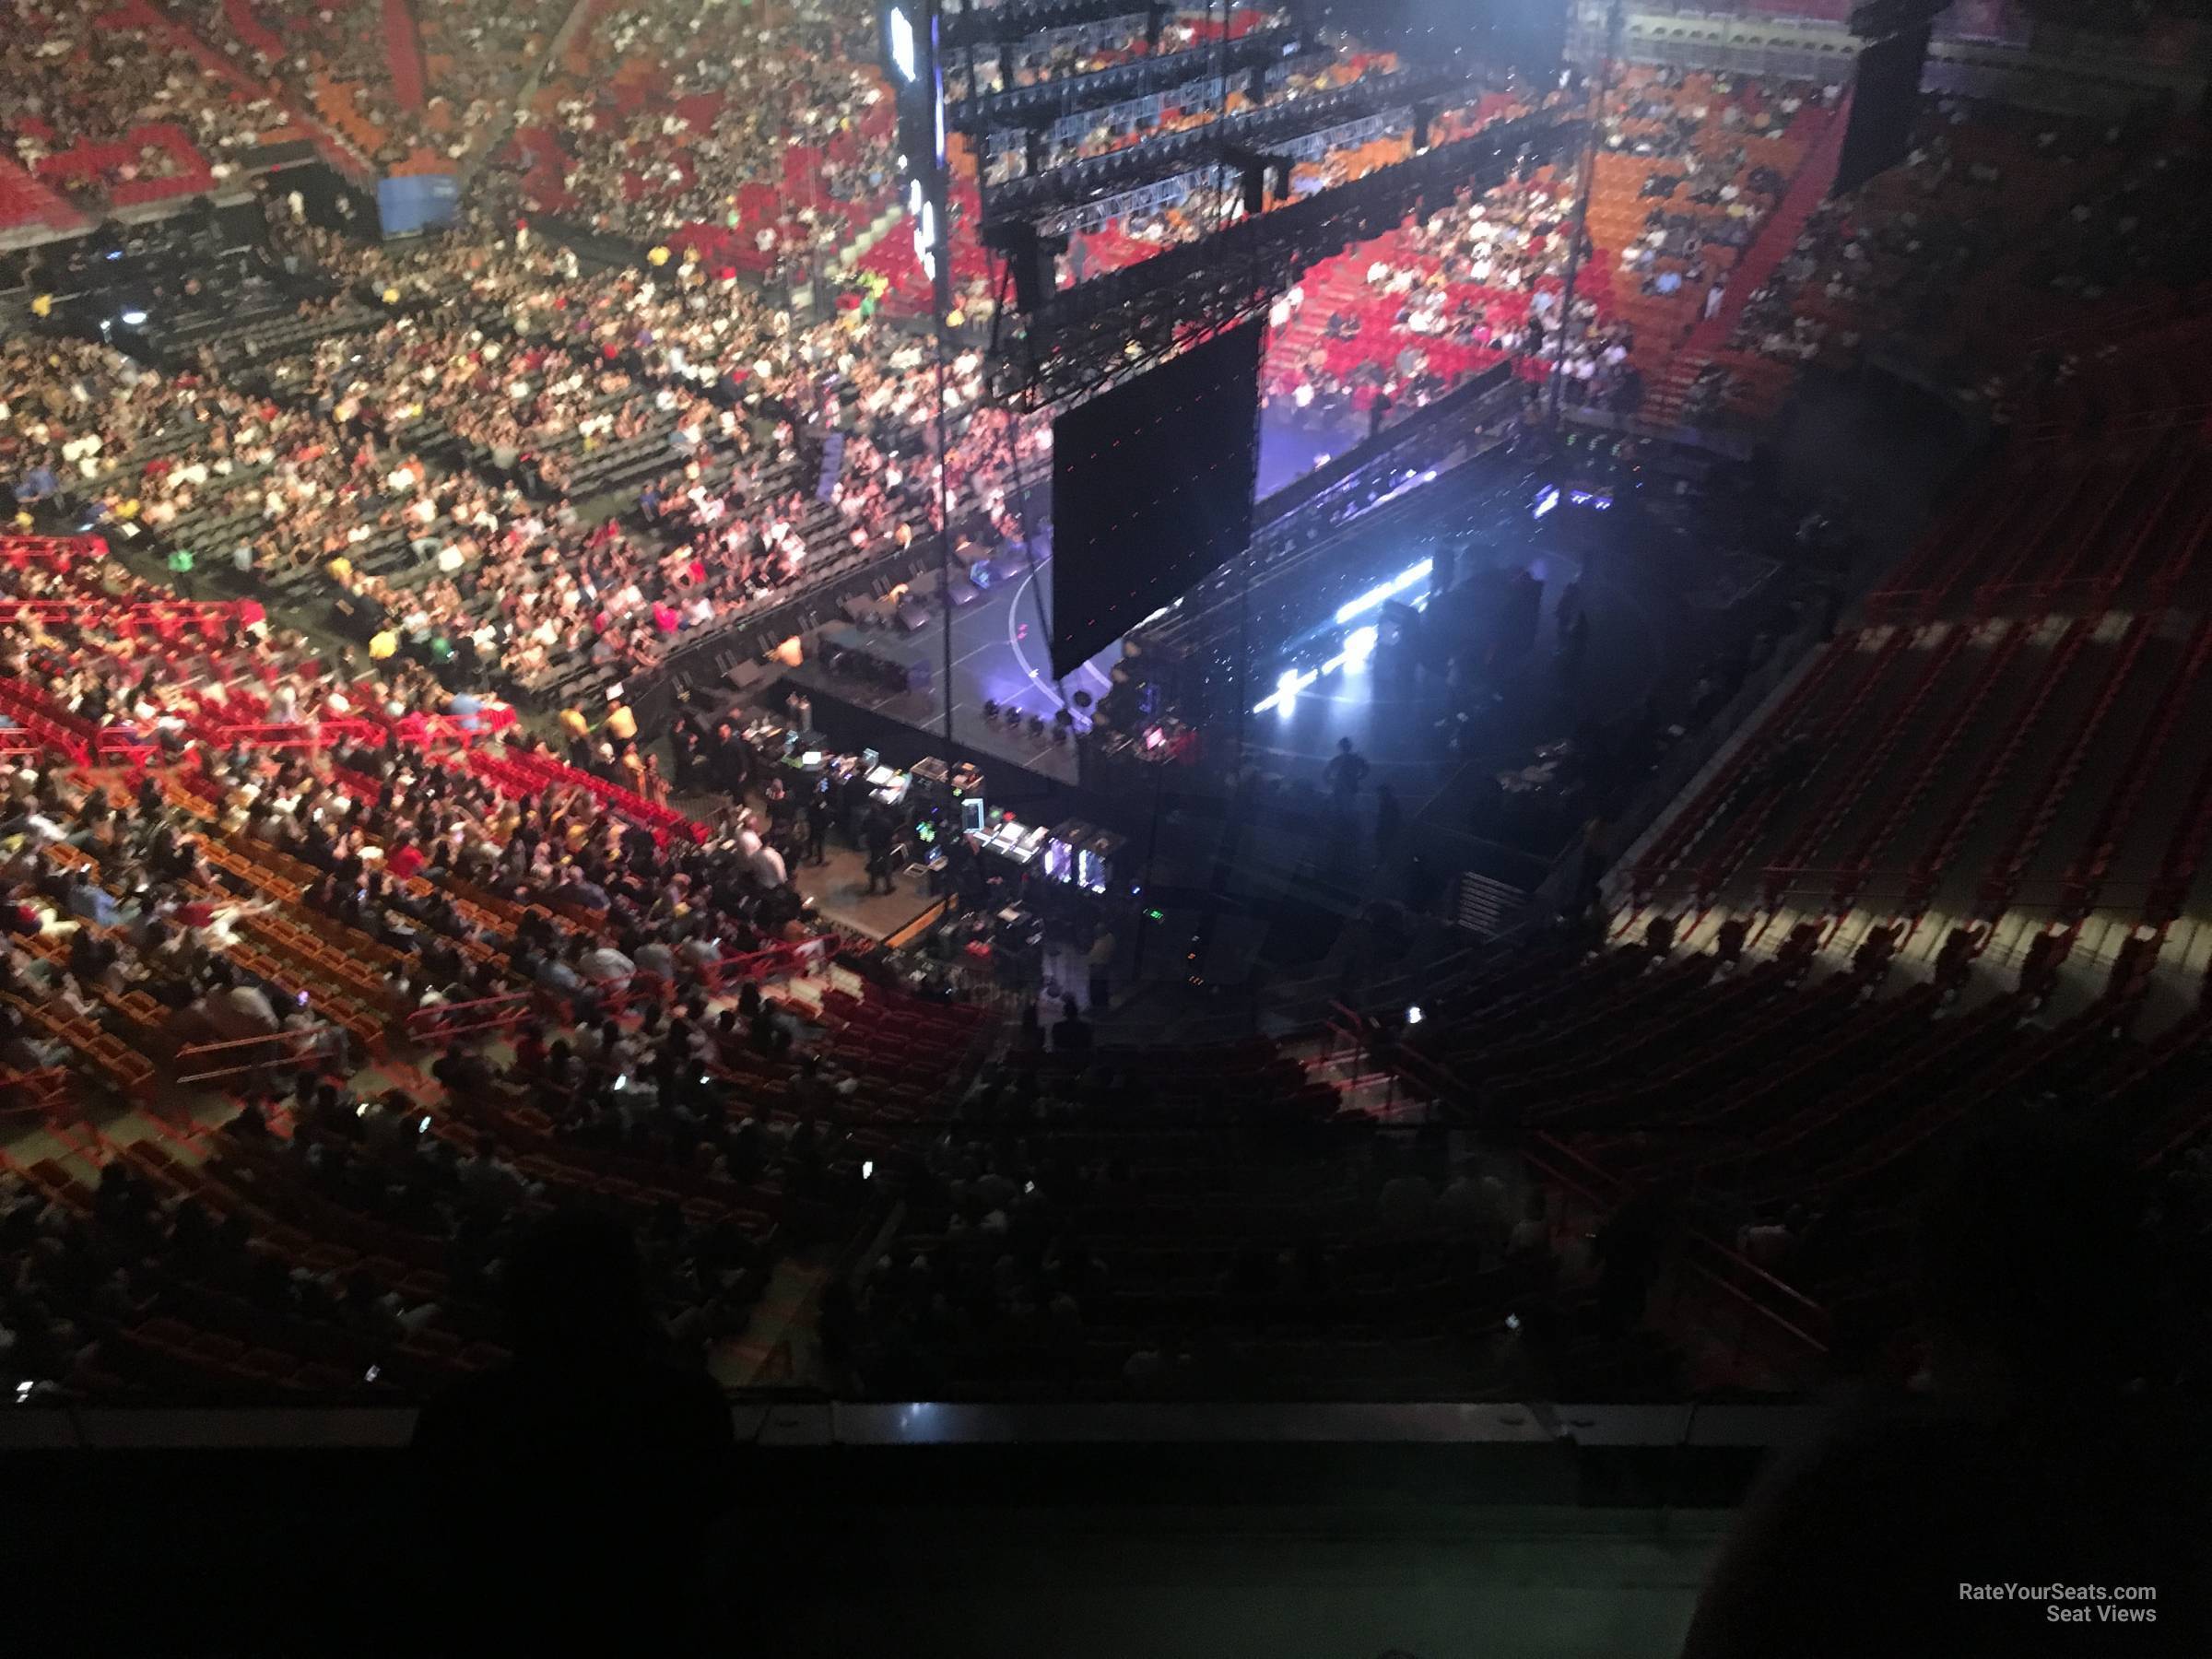 section 304, row 3 seat view  for concert - kaseya center